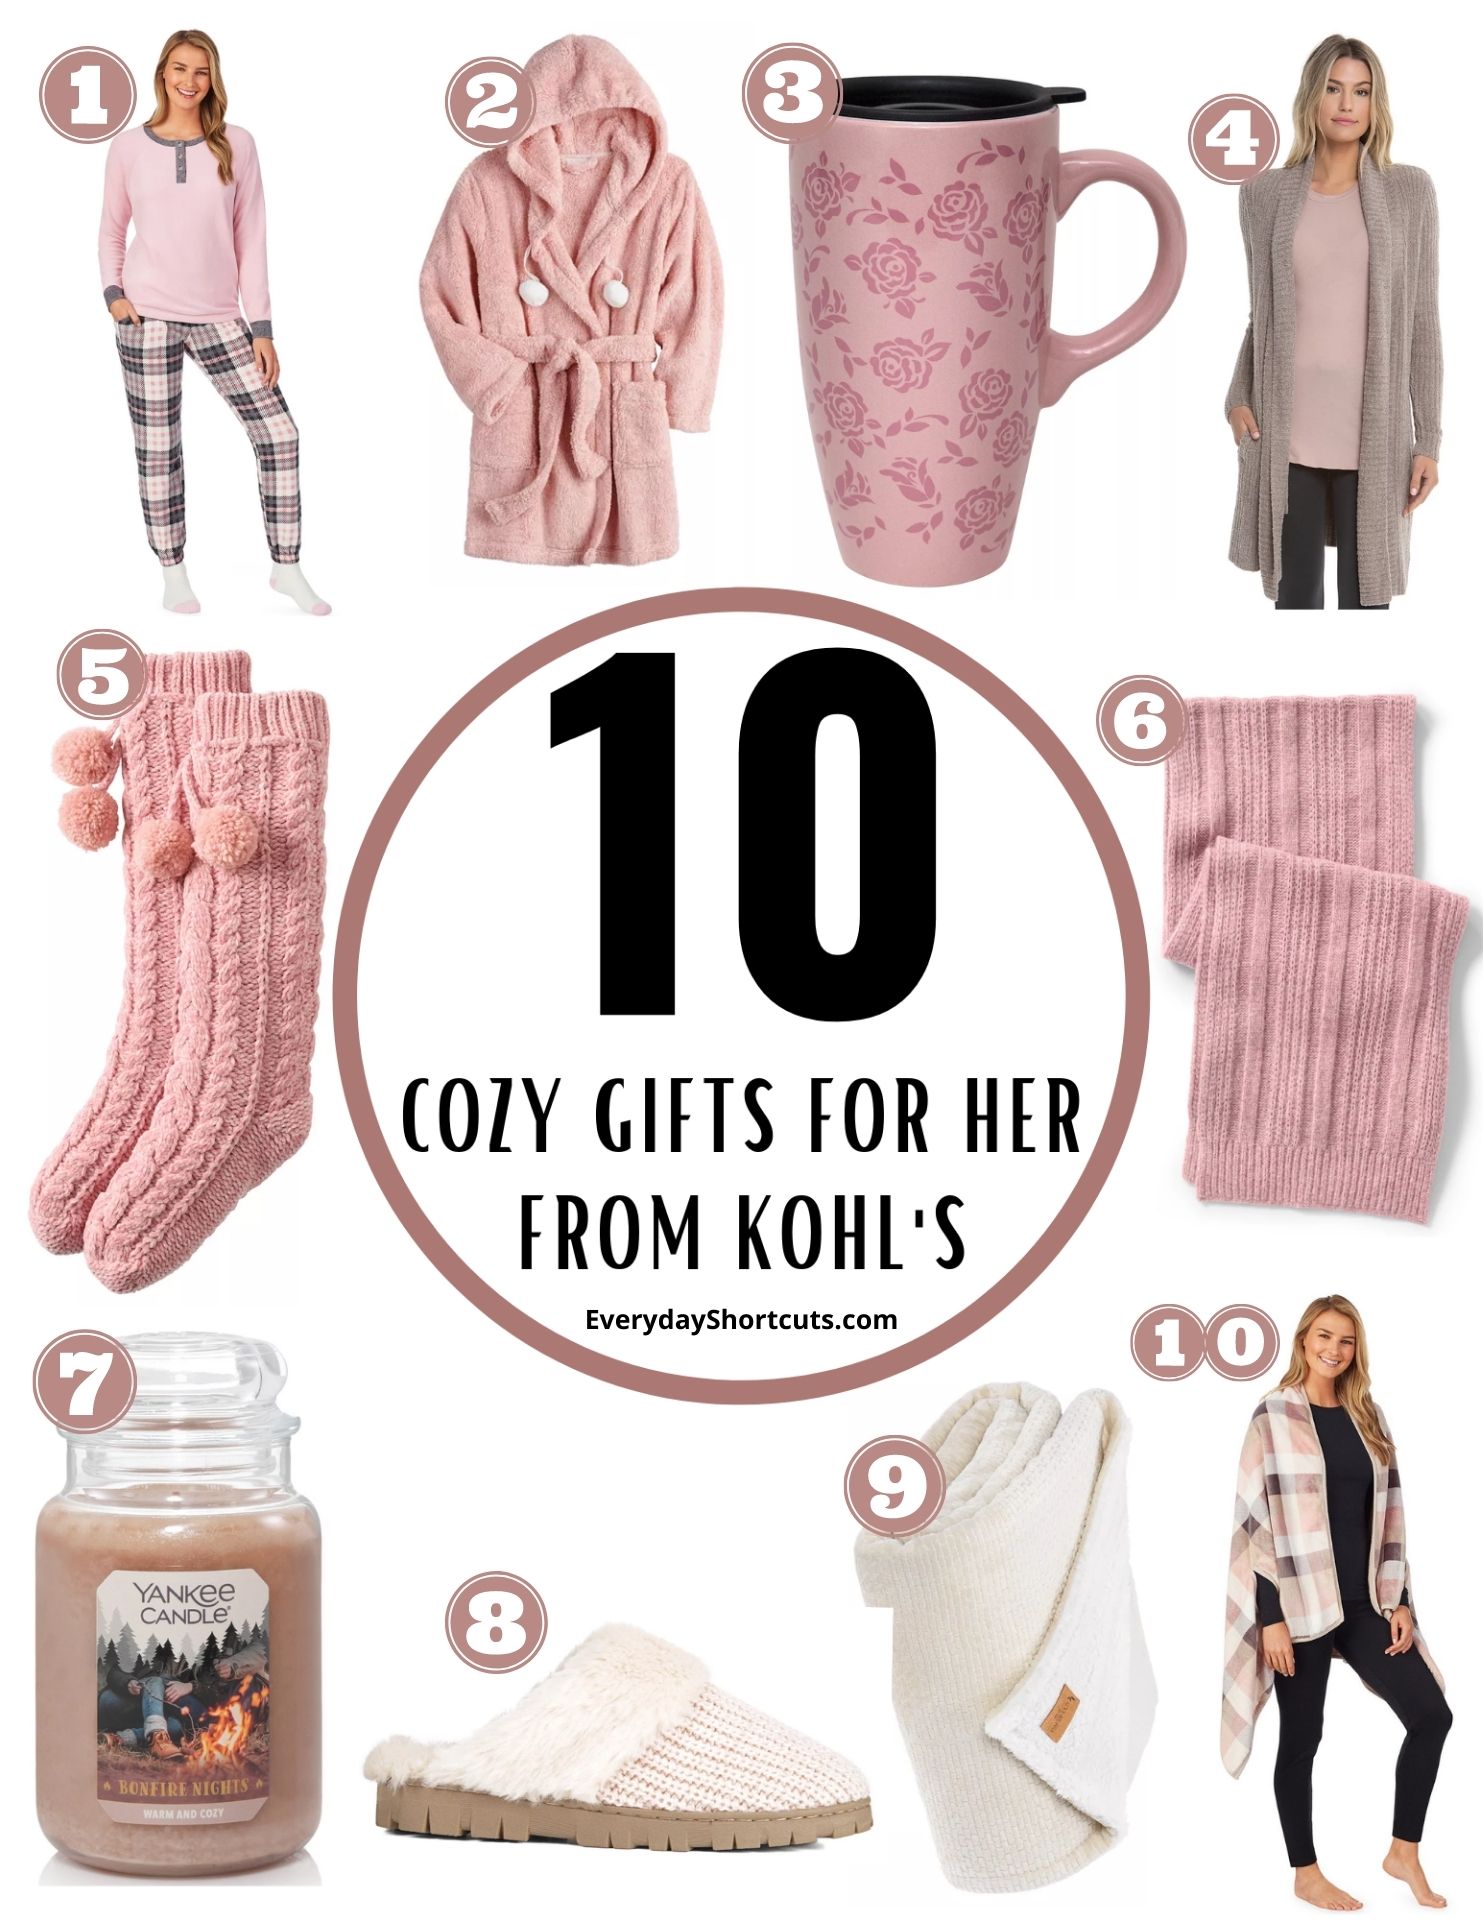 10 Cozy Gifts for Her from Kohl's - Everyday Shortcuts